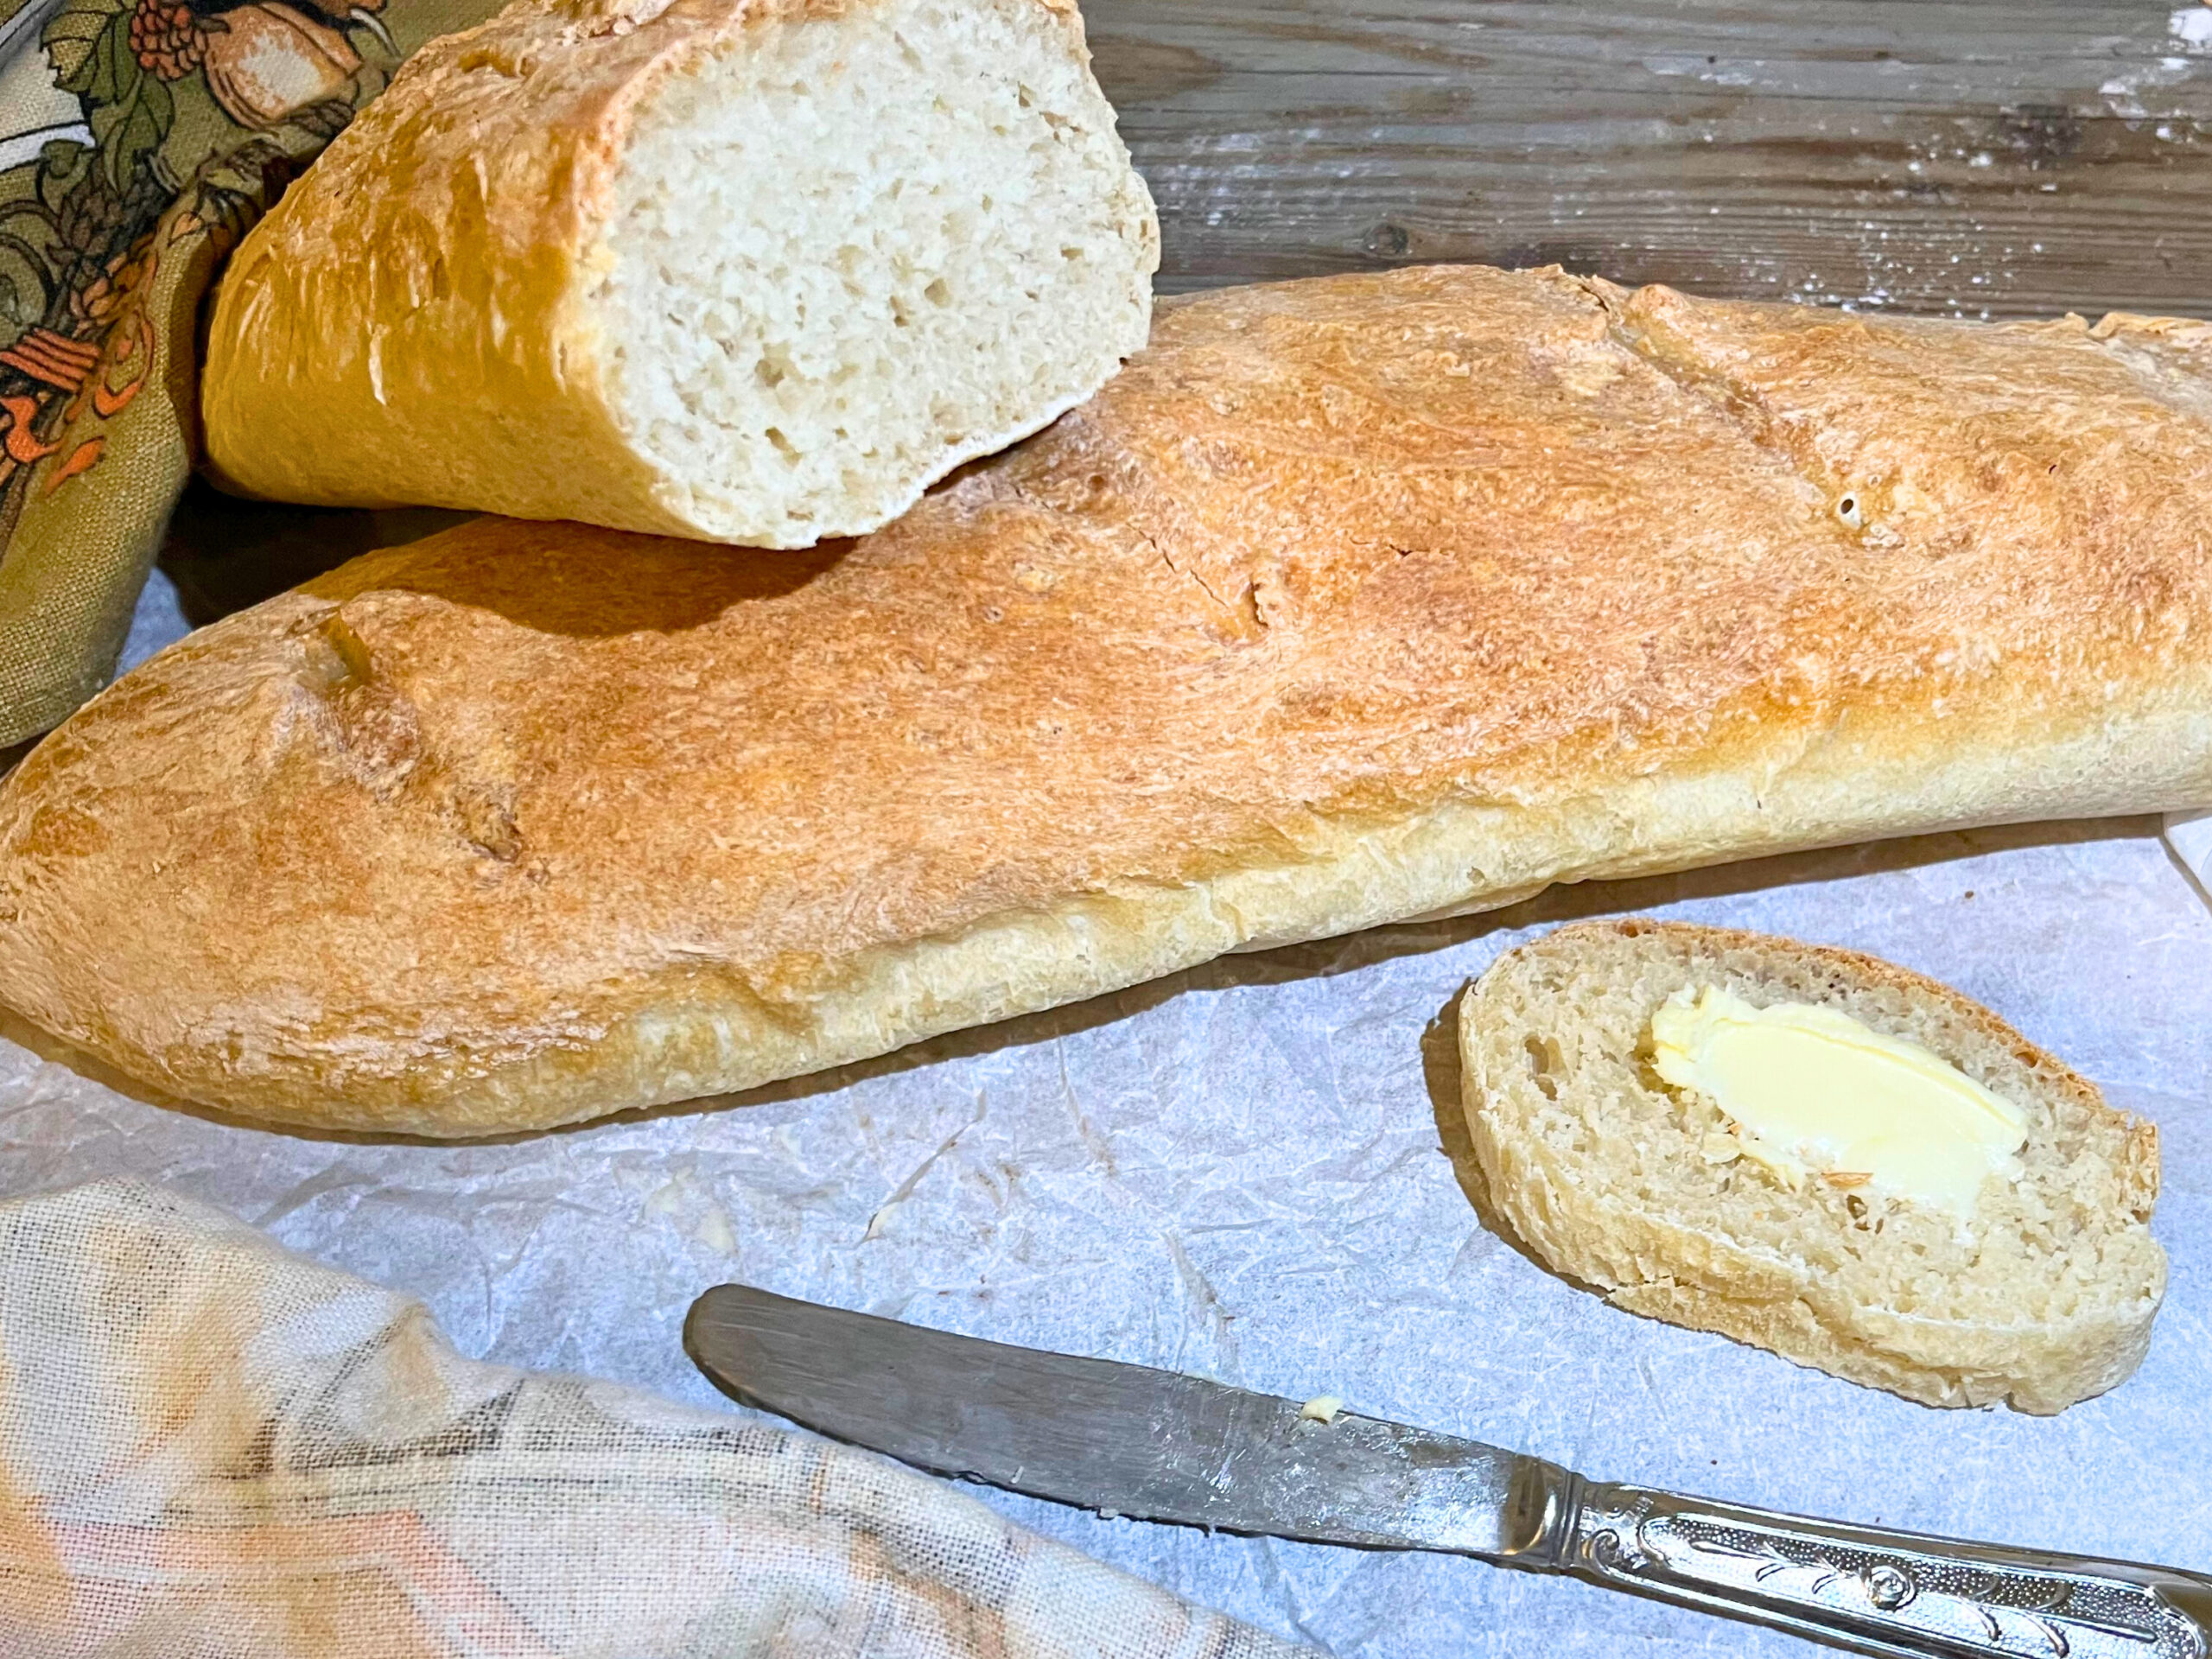 A baguette on a piece of parchment paper. A loaf cut in half and a slice of bread in the foreground with butter on top.